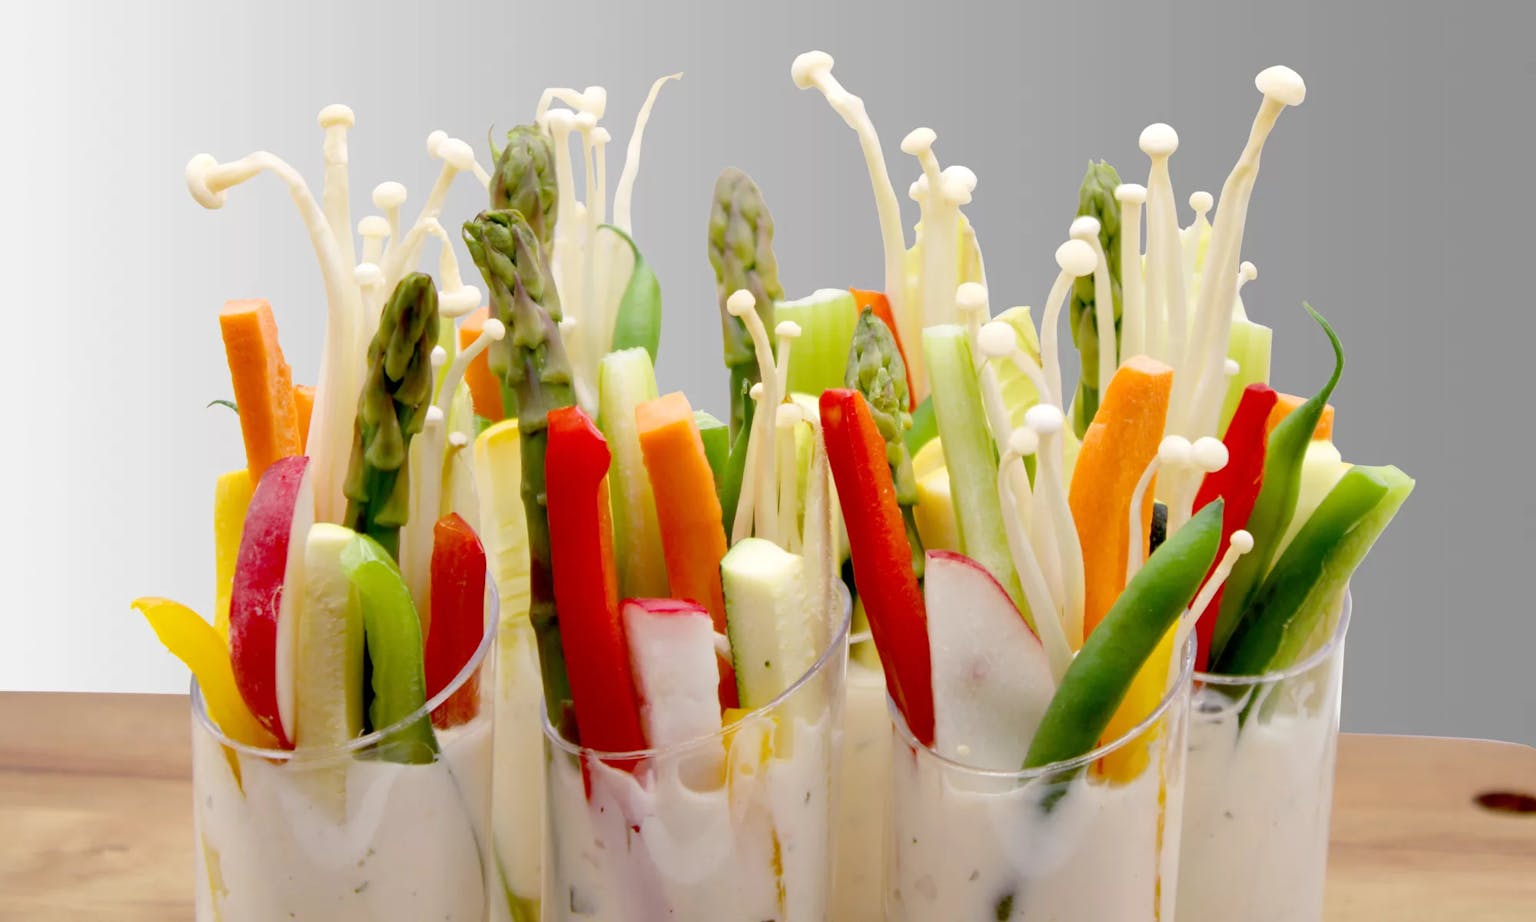 These crunchy cups will please your palate and catch the eye of discerning guests. Sticks of carrot, celery, pepper, and squash, garnished with endive. Includes your choice of ranch or blue cheese dressing. Includes 12 cups.